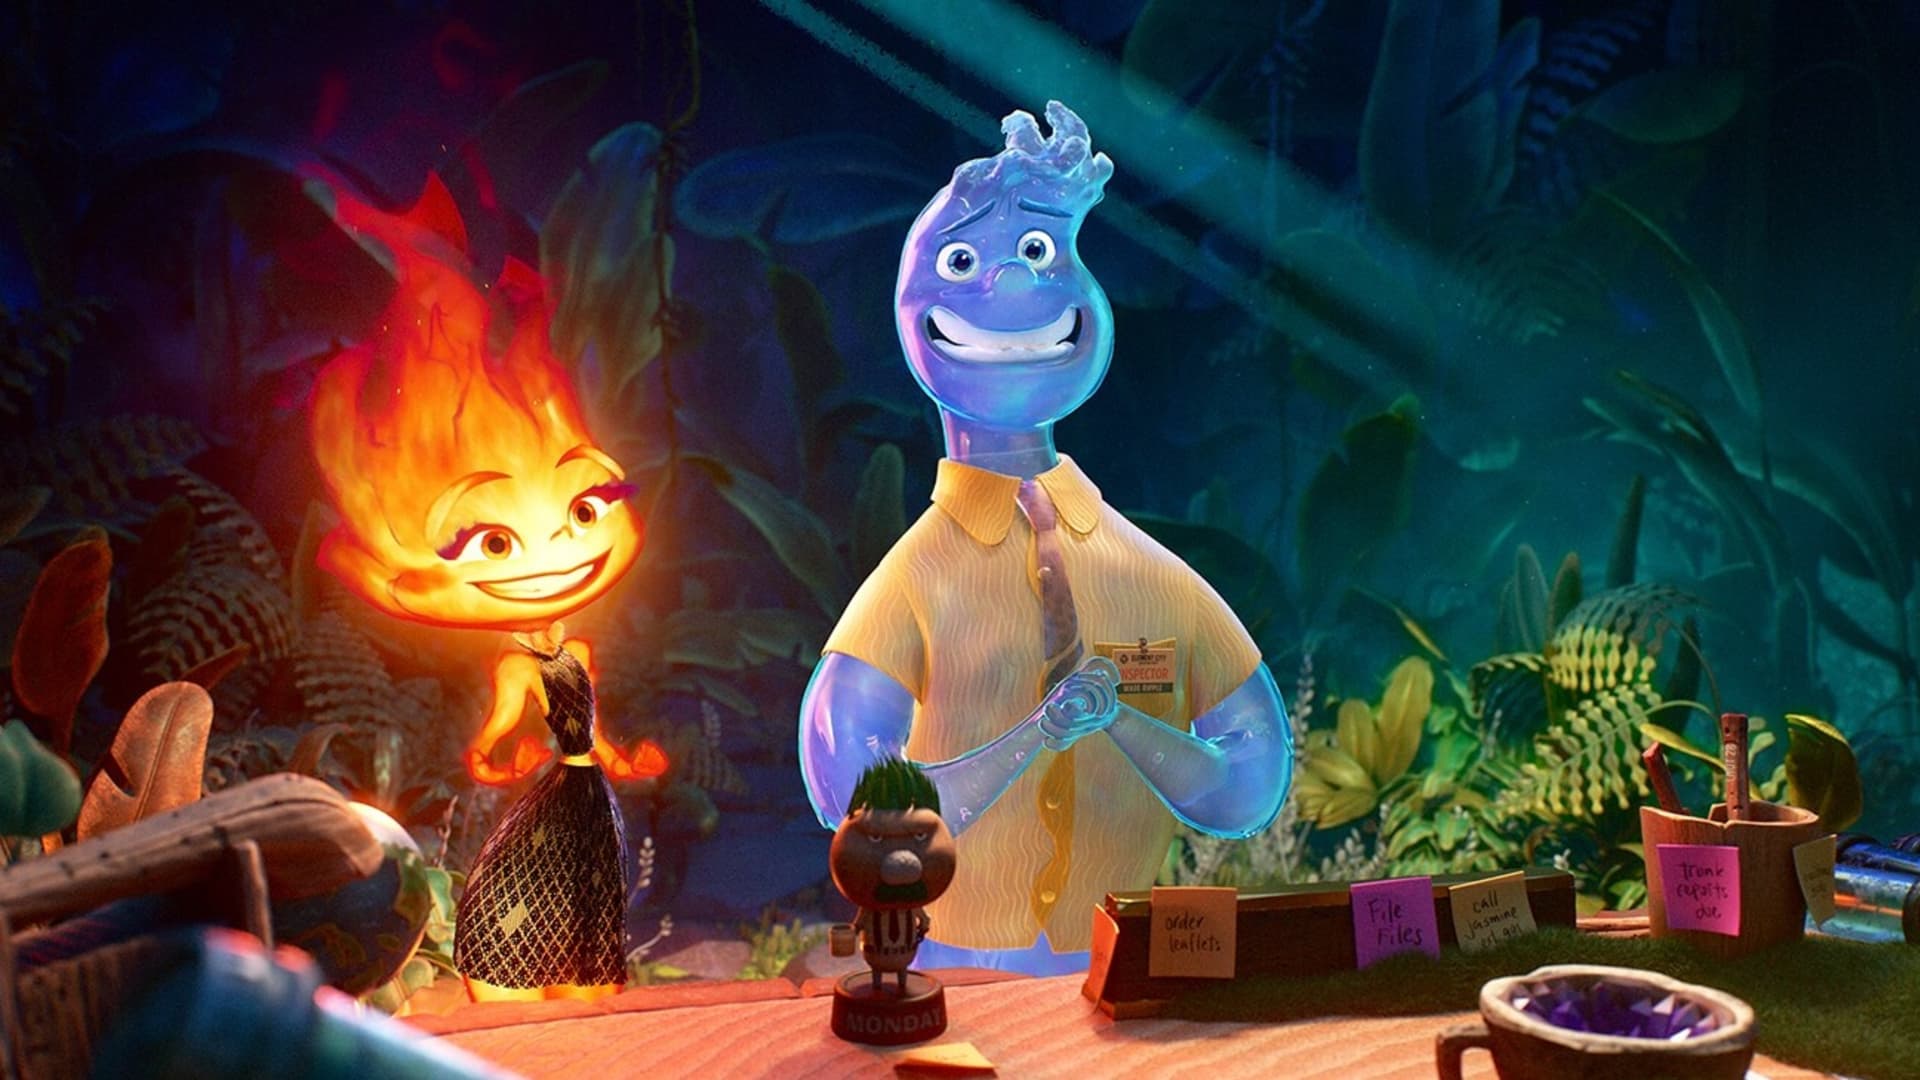 Disney banks on Pixar's Elemental to get out of animation rut - Will it succeed? 11